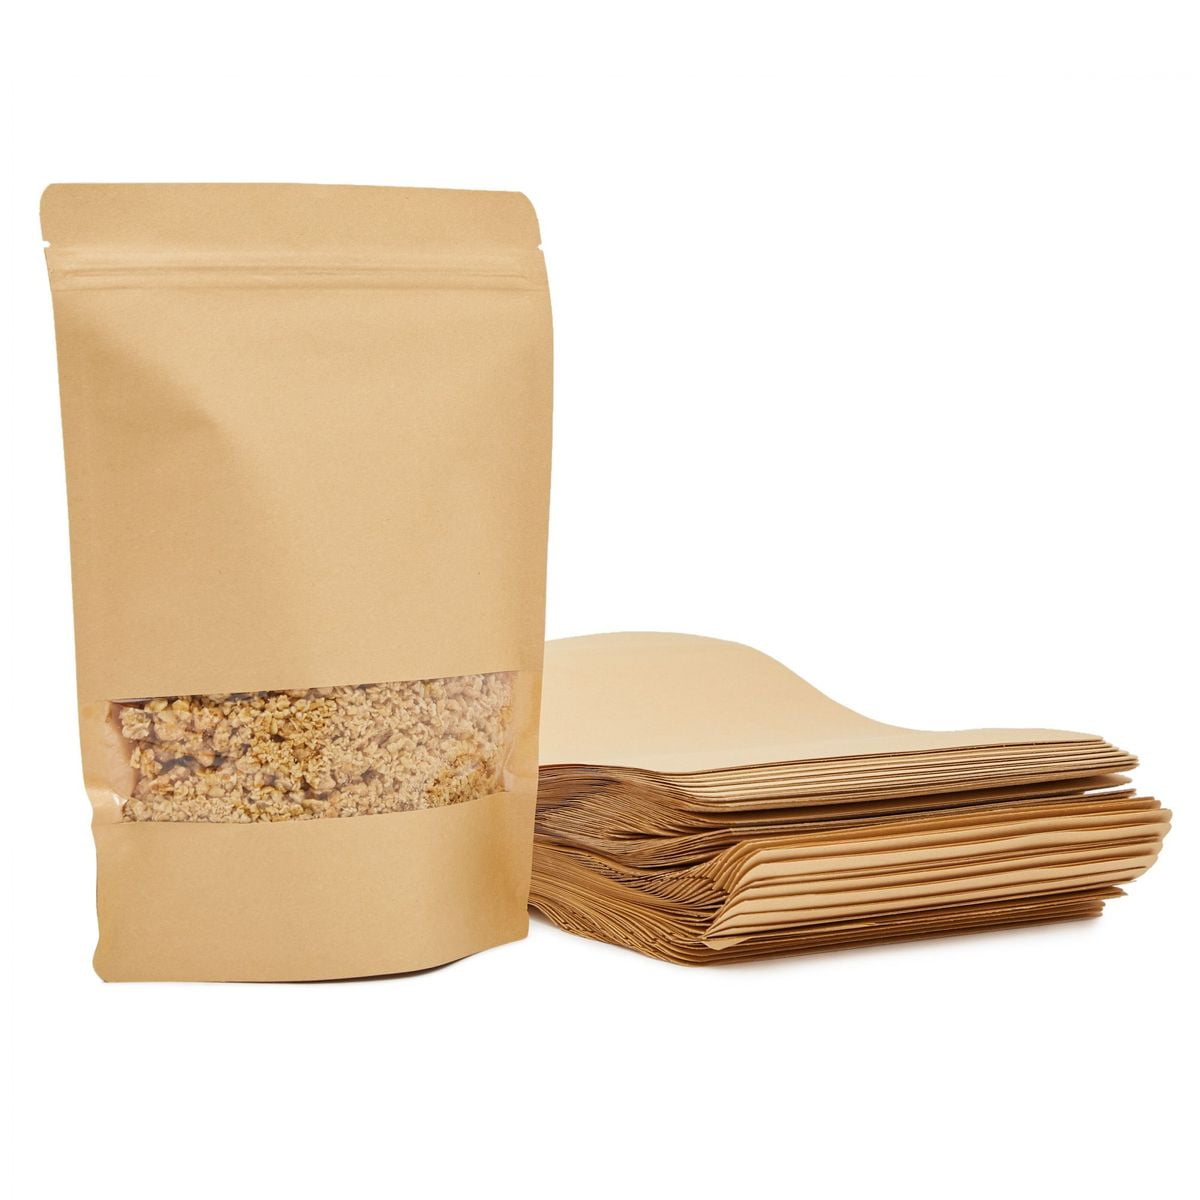 BEISHIDA 50 pcs 4.7 x 7.7 Inch Resealable Bags Kraft Paper Bags with Window  Stand Up Pouches Bags Brown Kraft Paper Bags Food Storage Bags Sample Bags